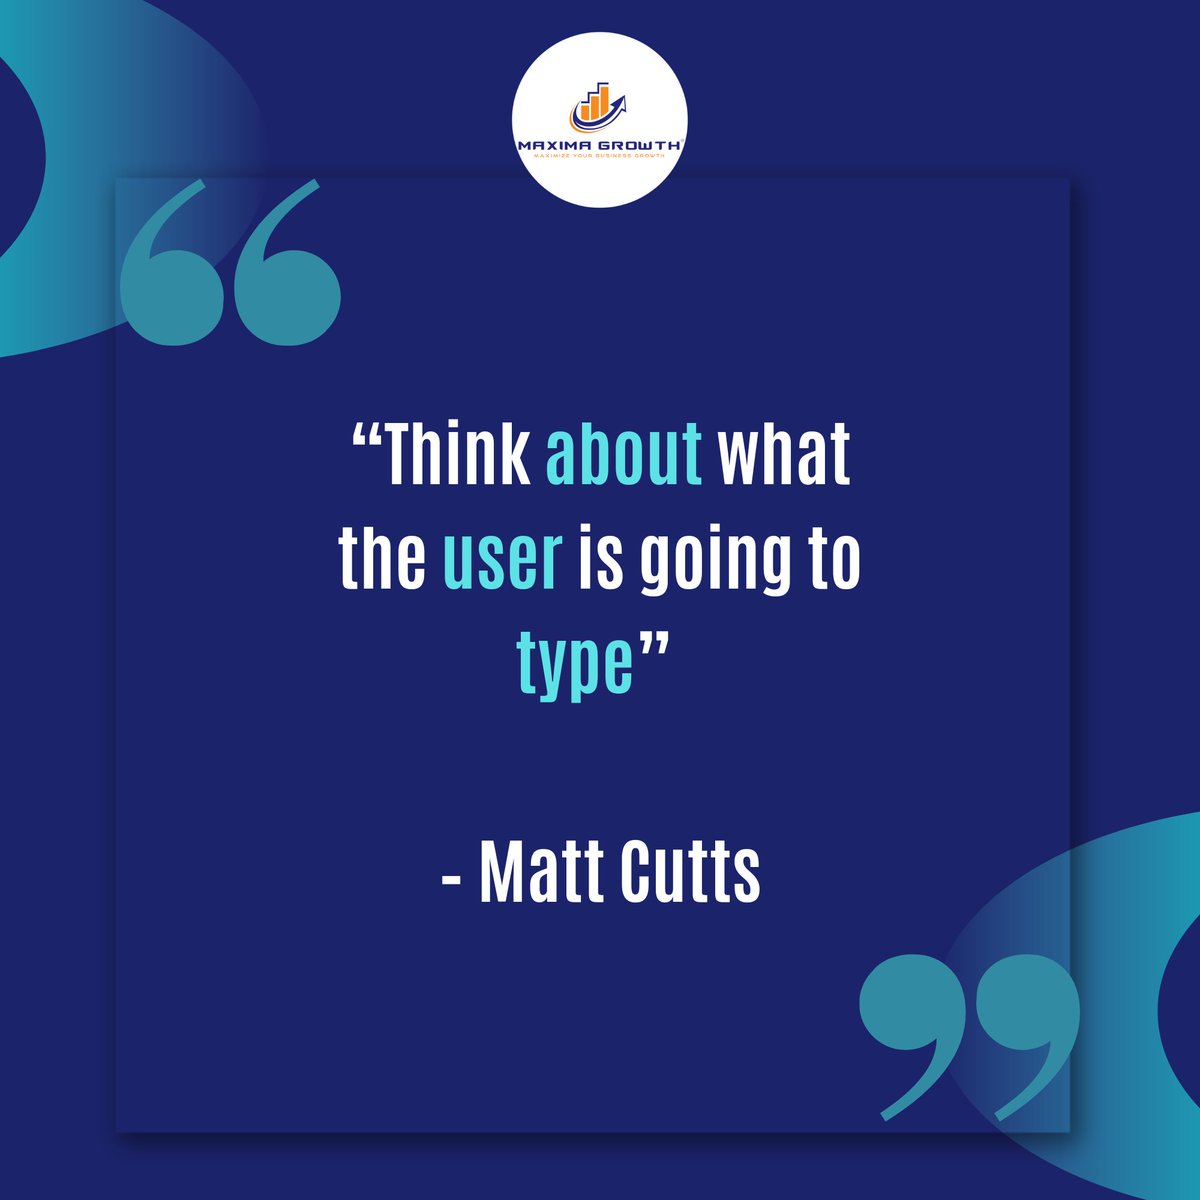 💁‍♂️ Matt Cutts is referring to the importance of anticipating and understanding the search queries that users might enter a search engine
Visit to know more: bit.ly/42qKD8b

#mondayquotes #quoteoftheday #marketingquote #marketingquoteoftheday #socialmediamarketingquote